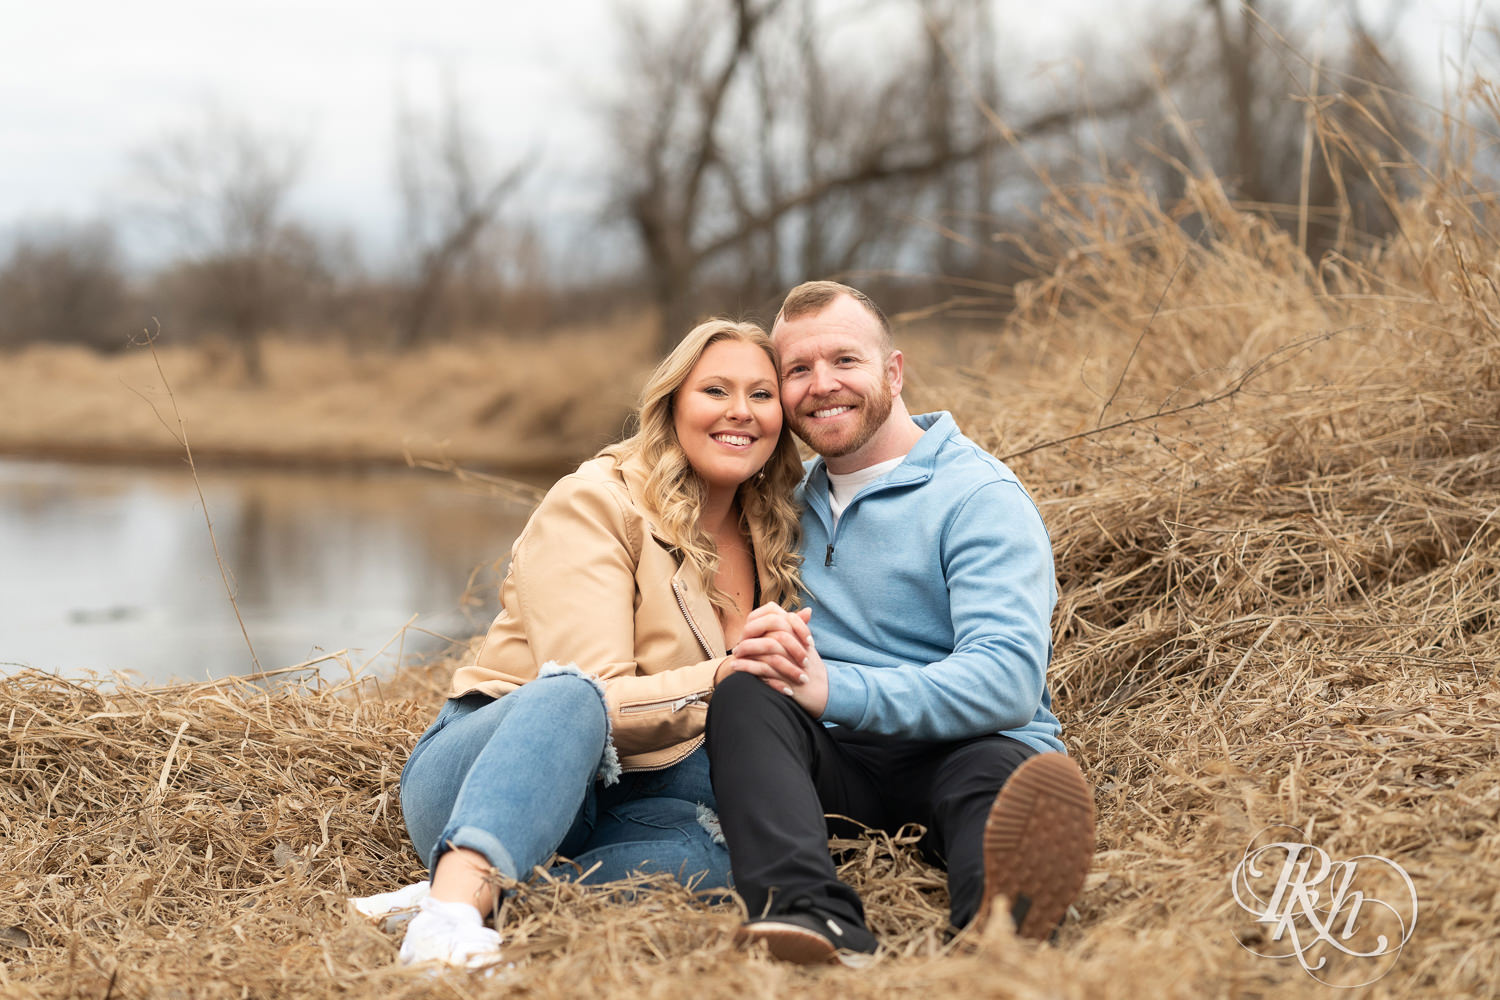 Man in blue shirt and woman in jeans smile on creekbed during engagement photography at Rice Creek Regional Trail in Shoreview, Minnesota.